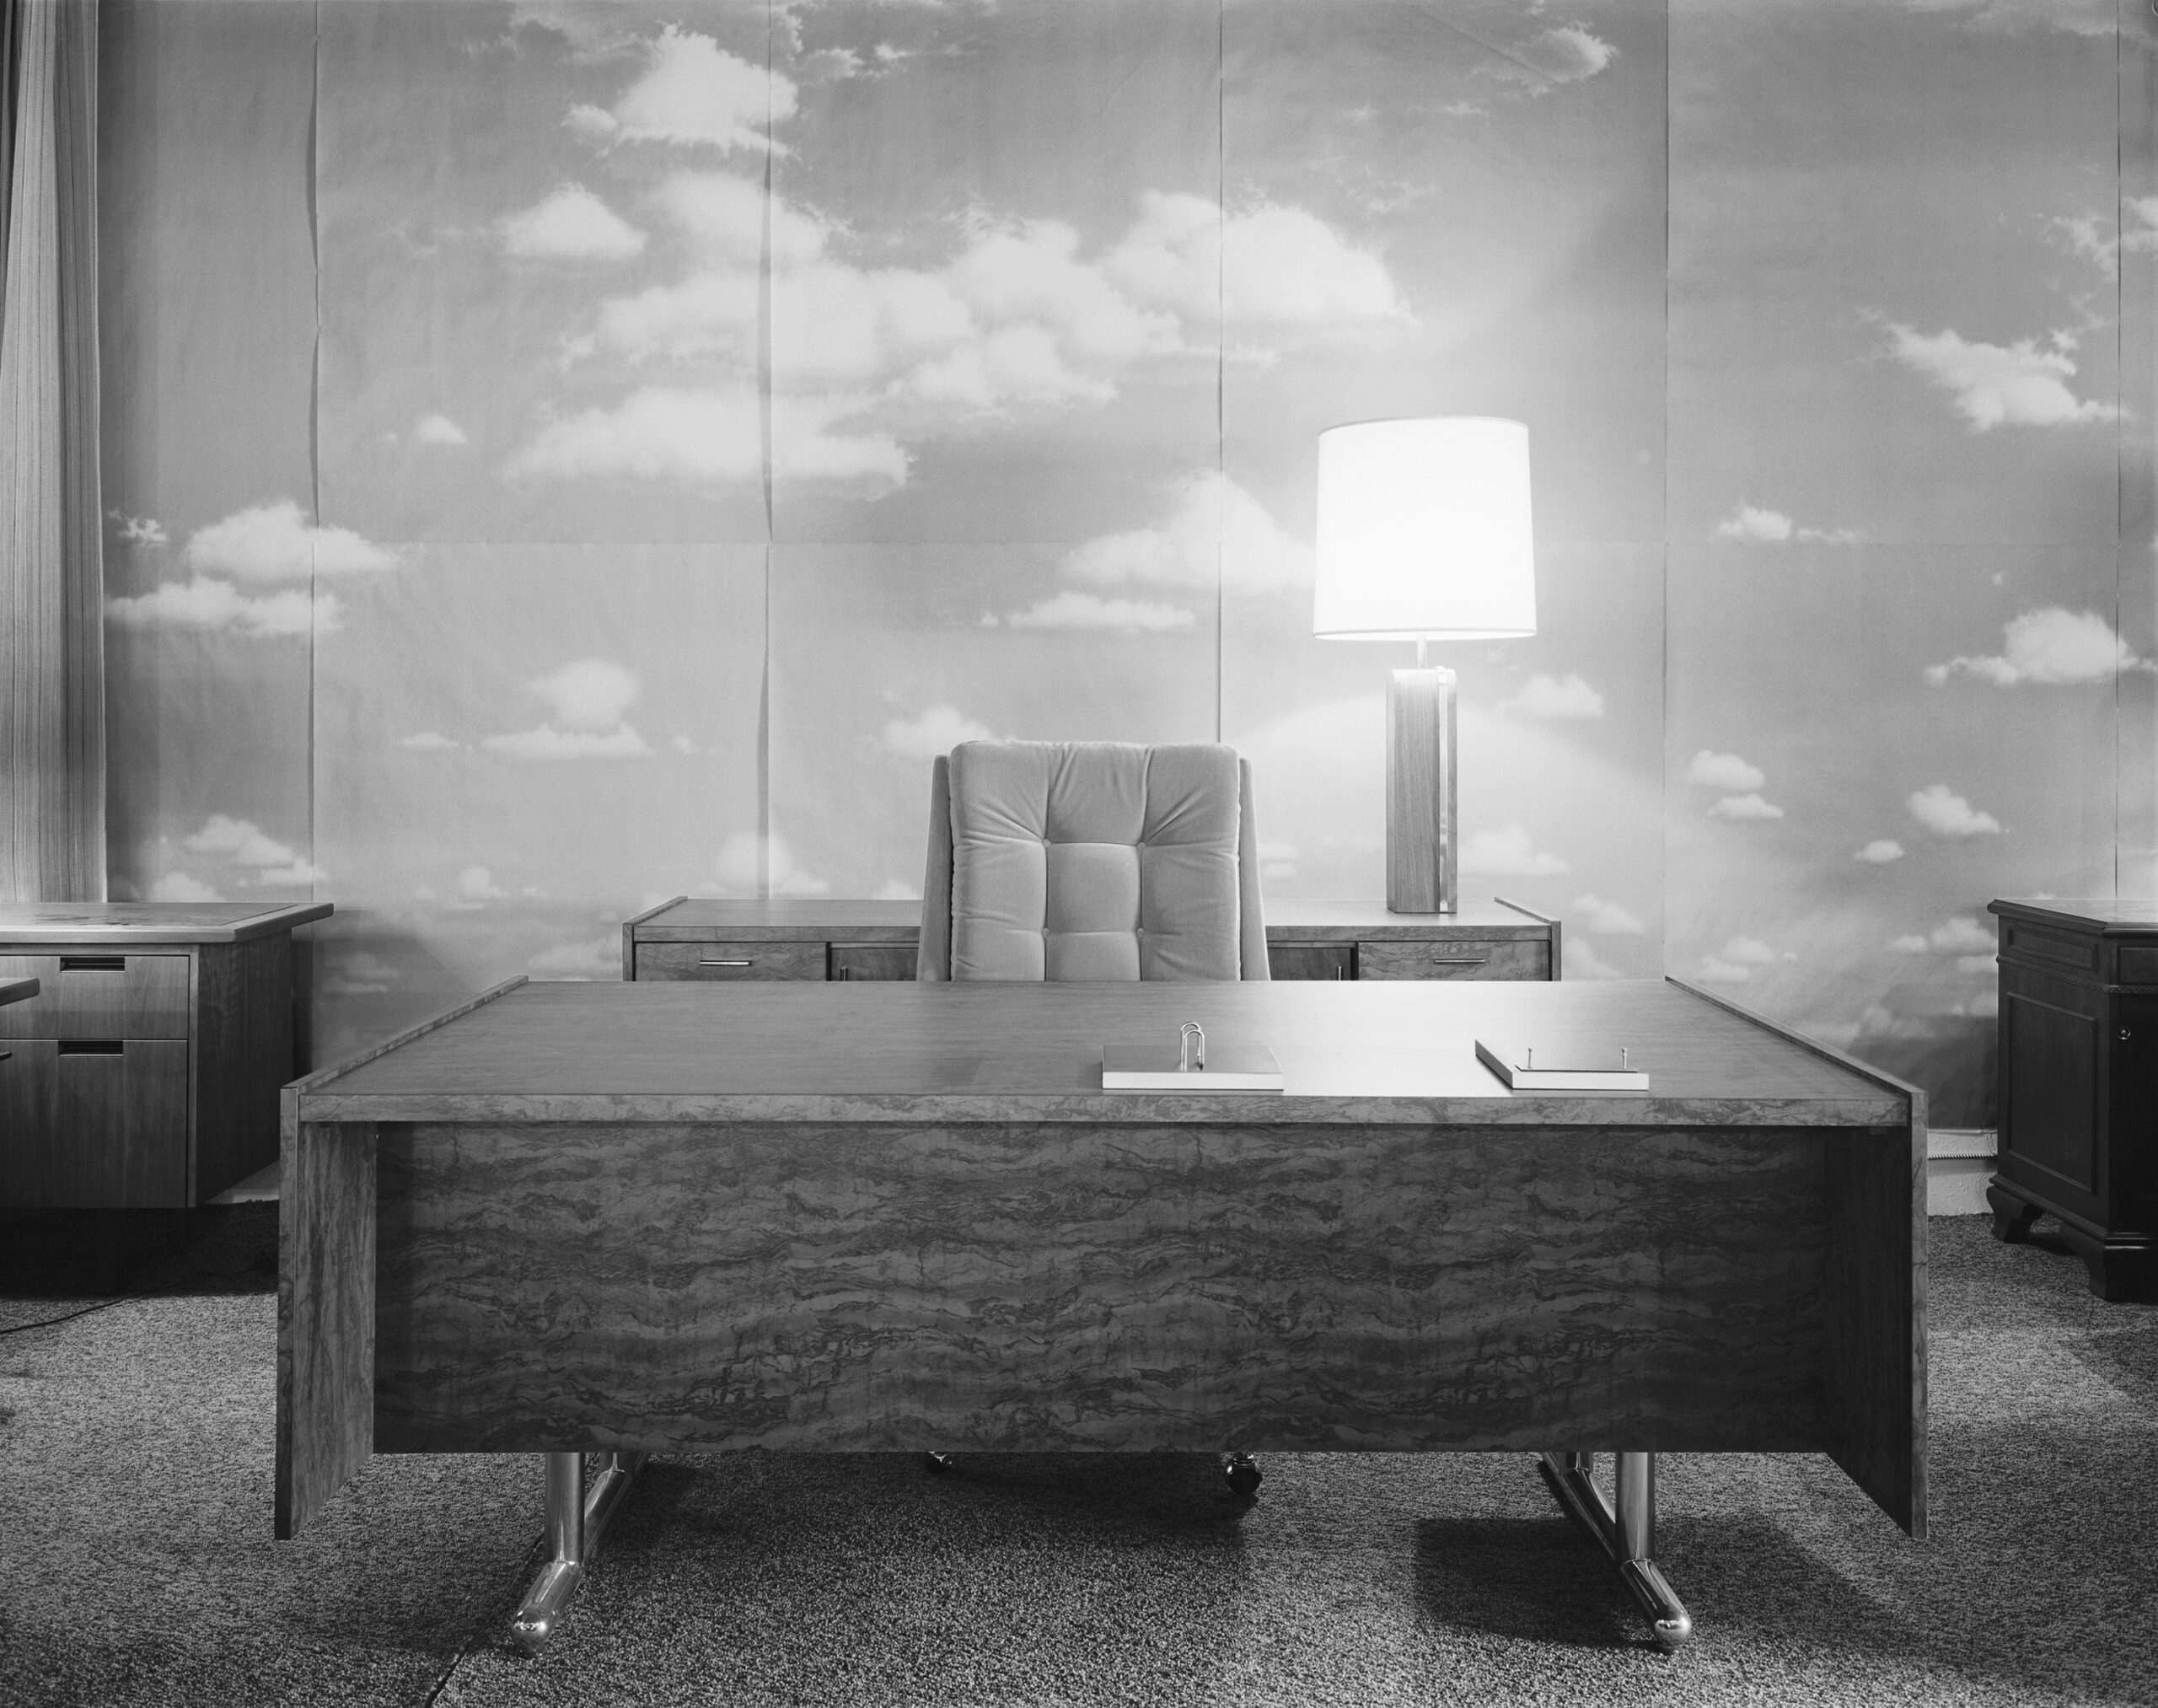     Lynne Cohen, Corporate Office, 1976. Courtesy of the Estate of Lynne Cohen and Olga Korper Gallery

